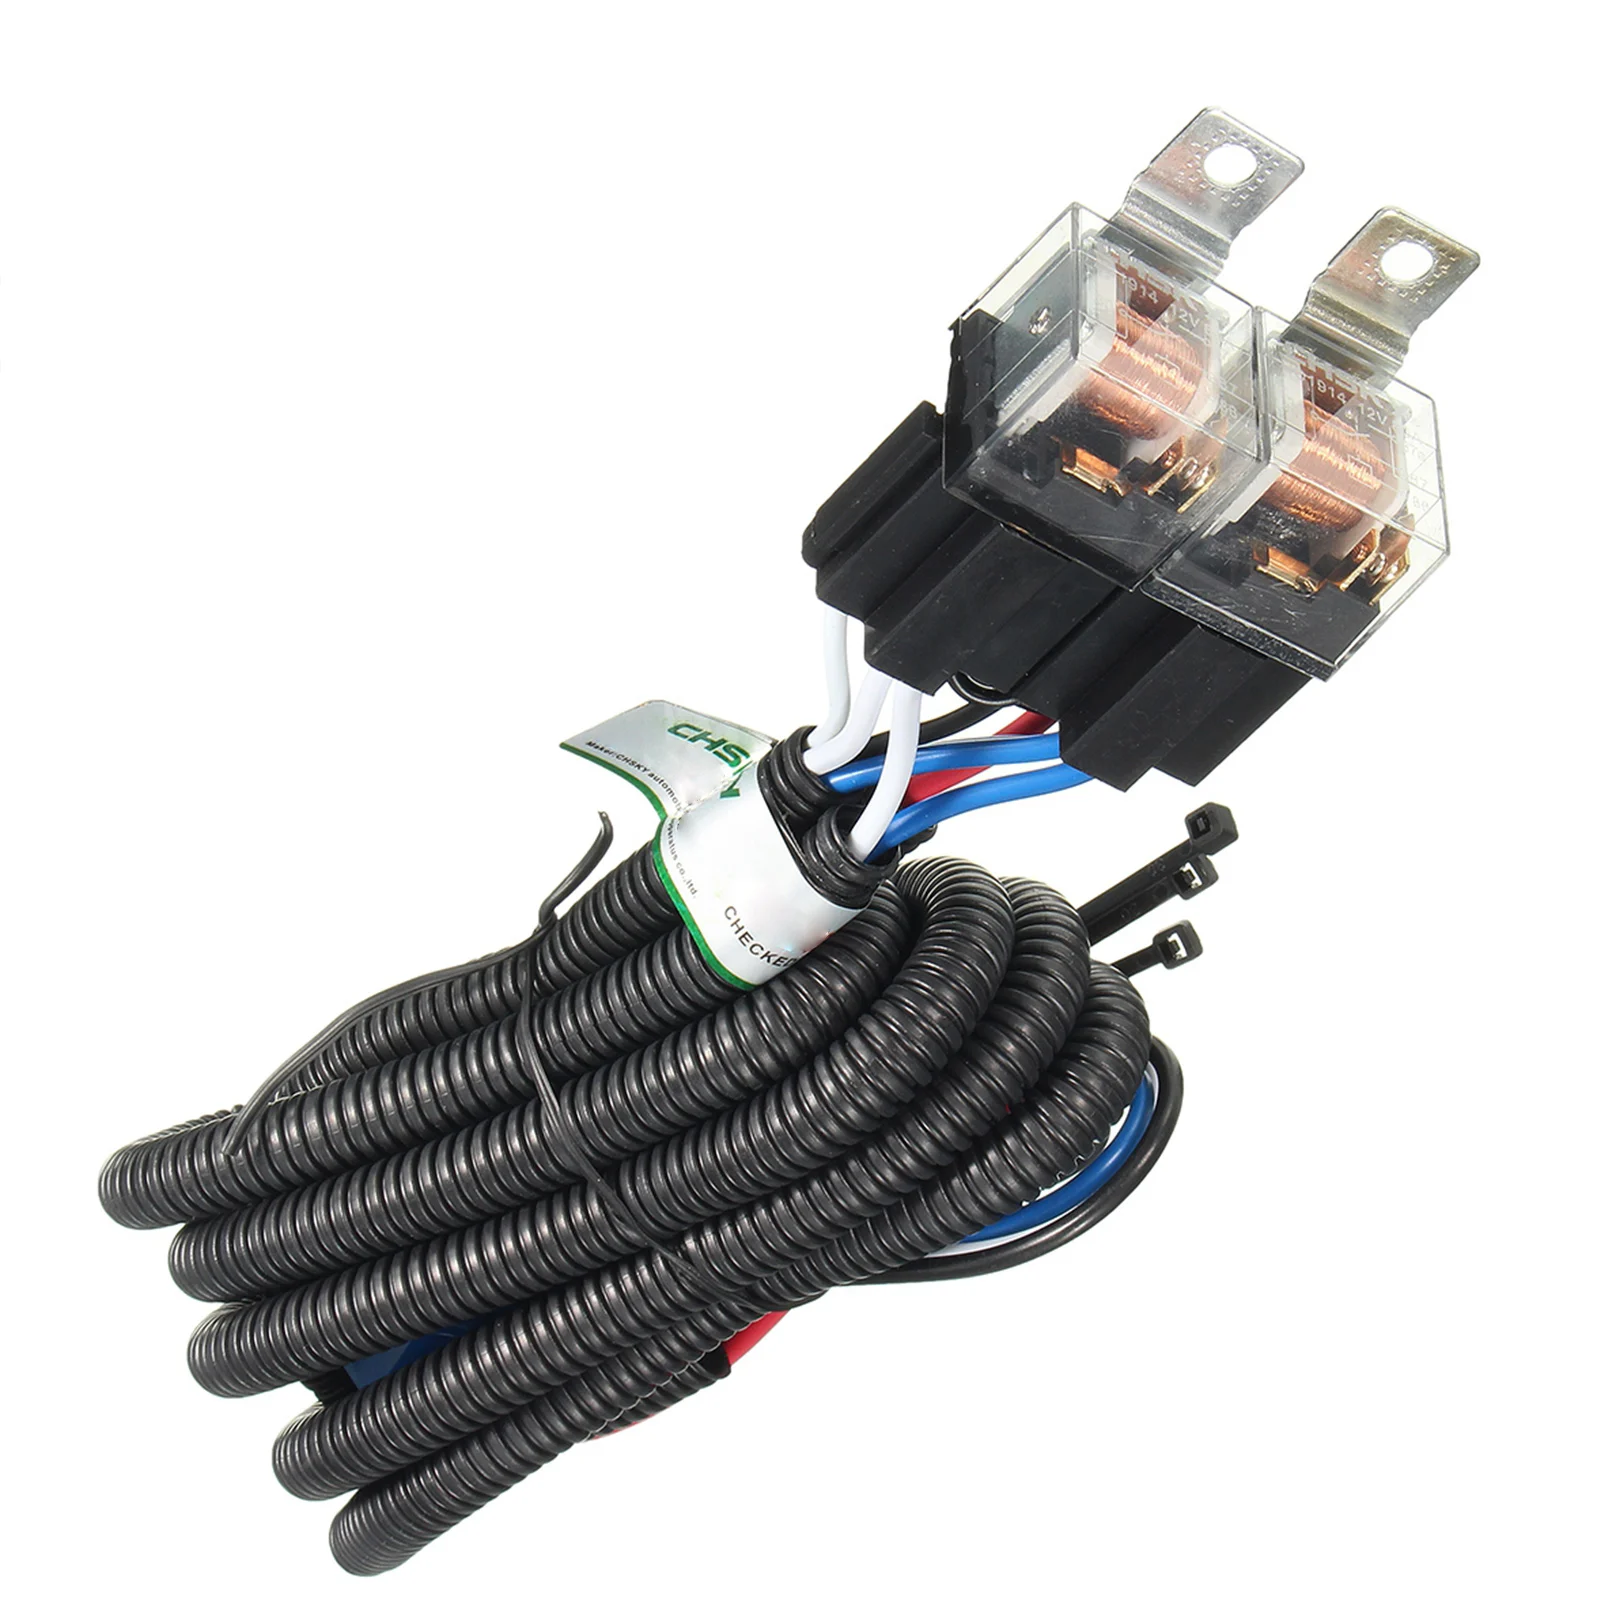 H4 LED Headlight Enhancer Bulb Relay Wiring Harness Plug Kit Relay Wiring Harness Kit Automobile Replacement Accessories Way